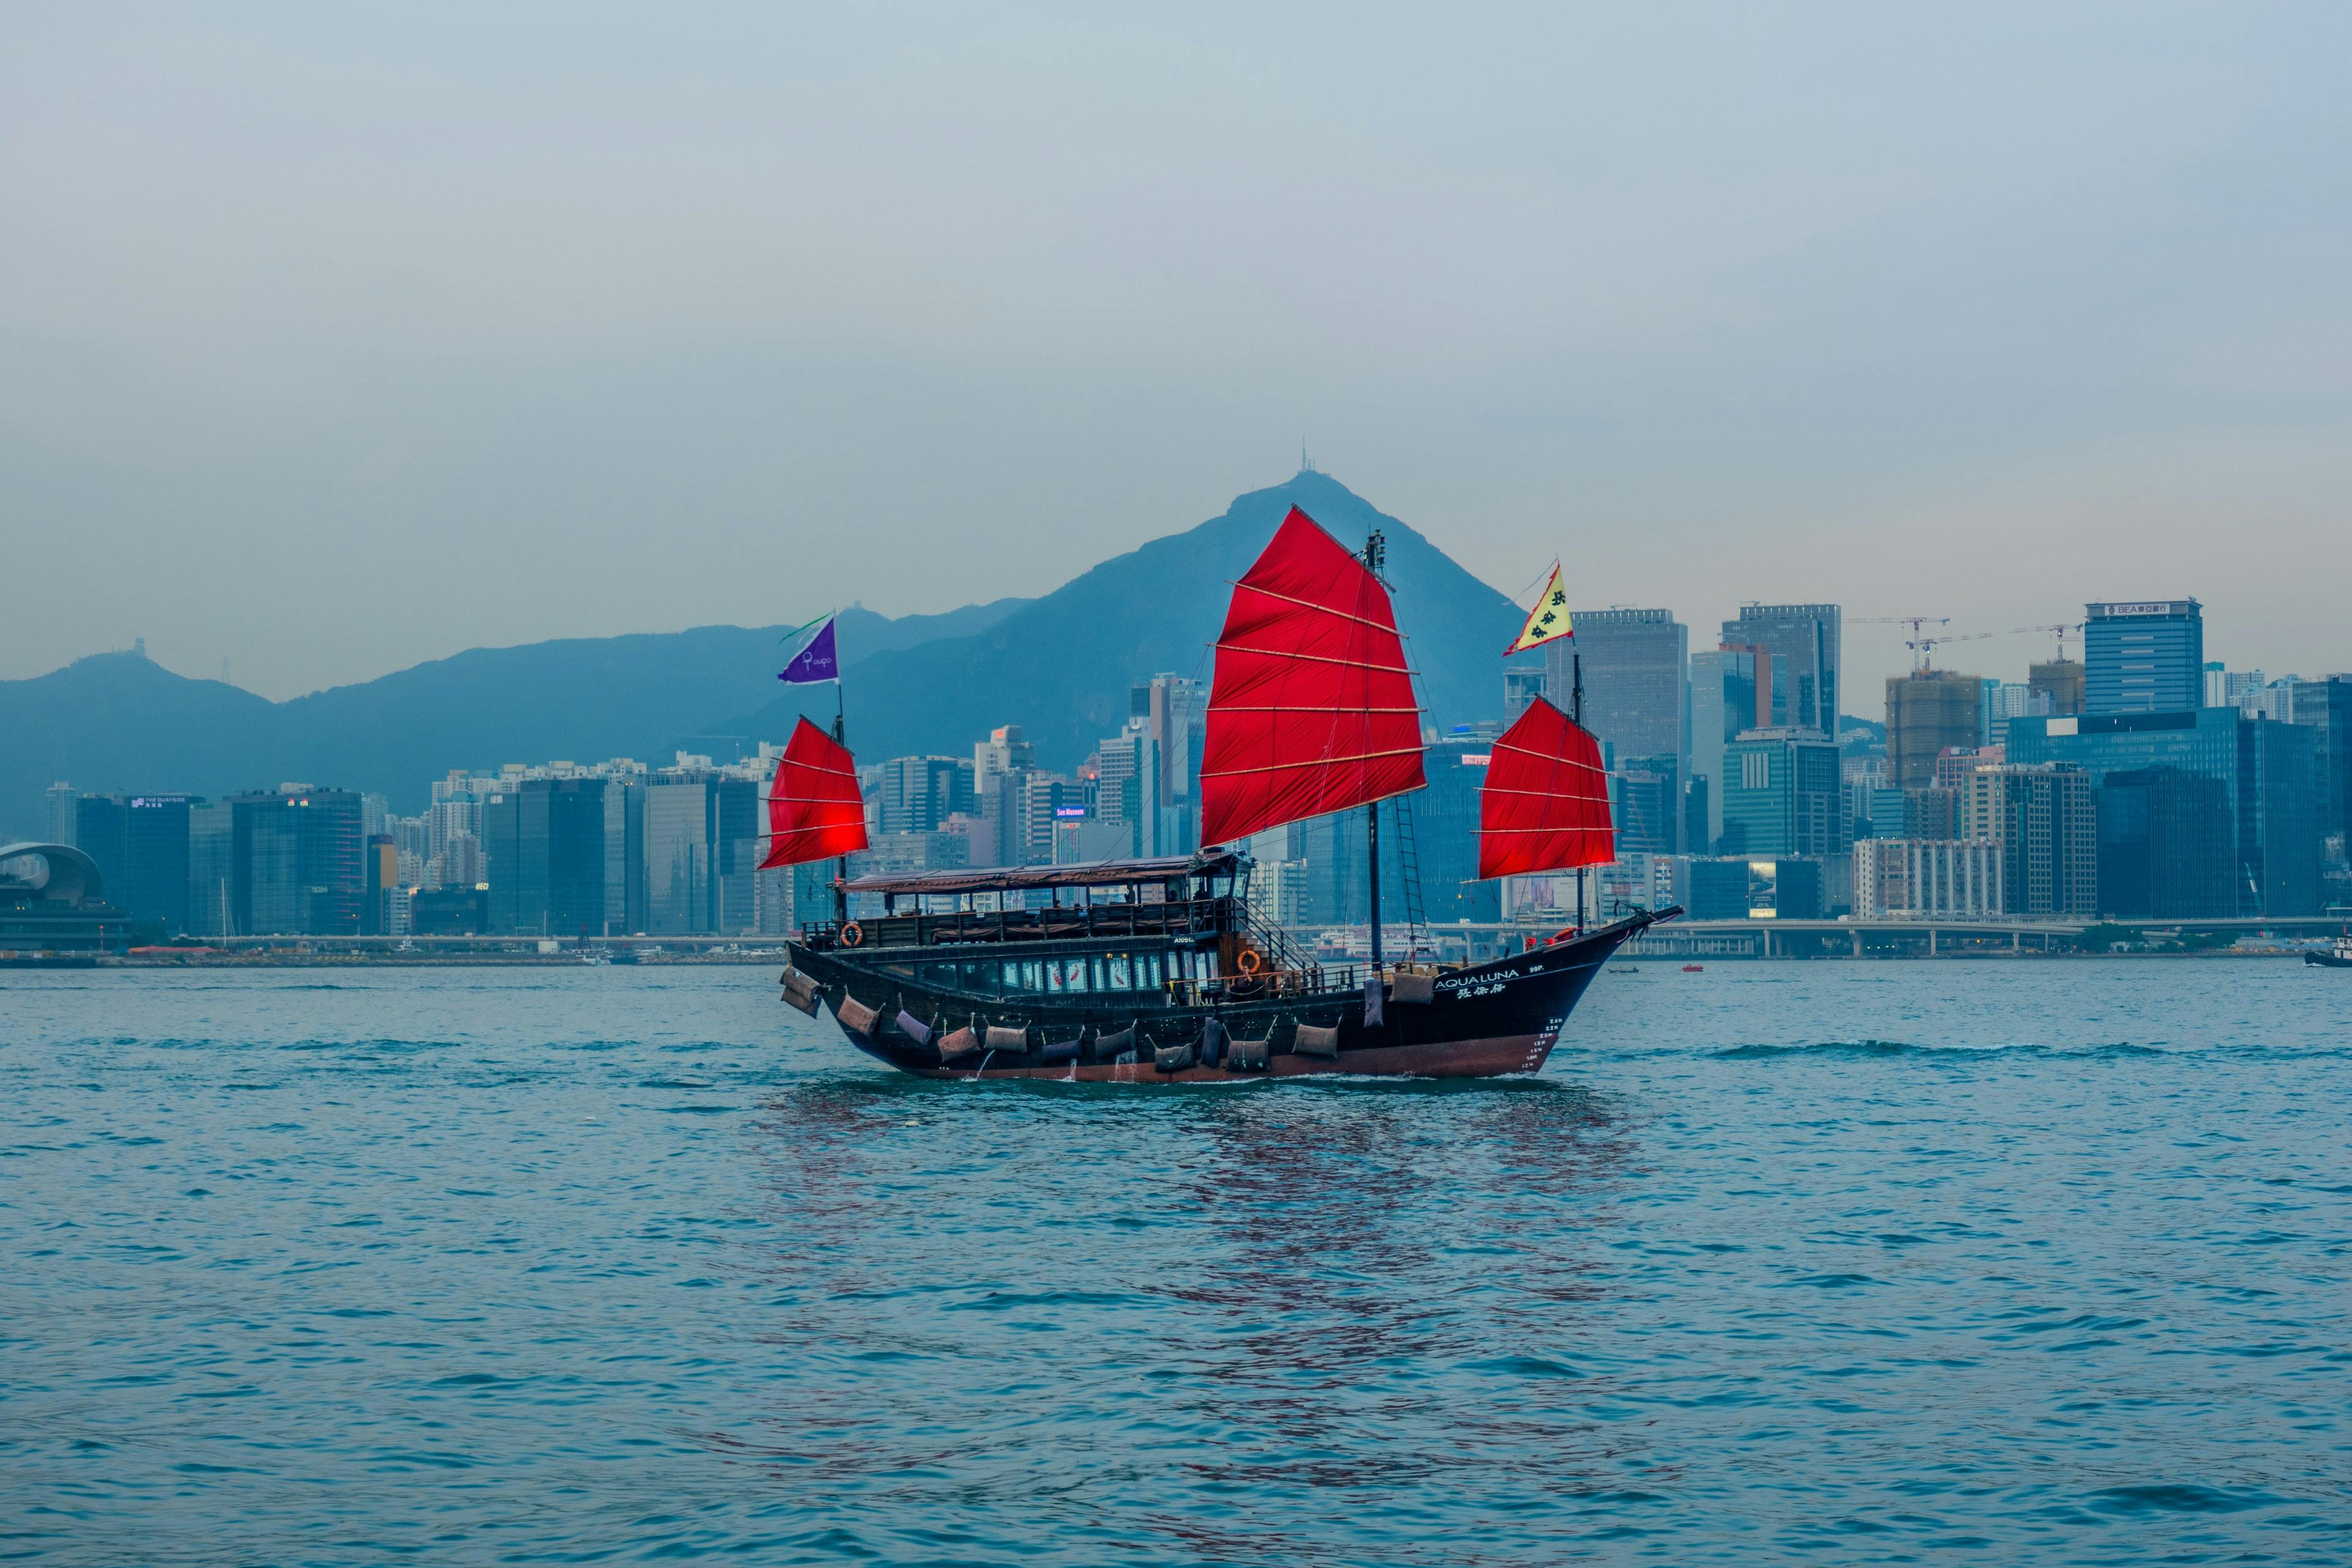 Boat with red sails in Hong Kong